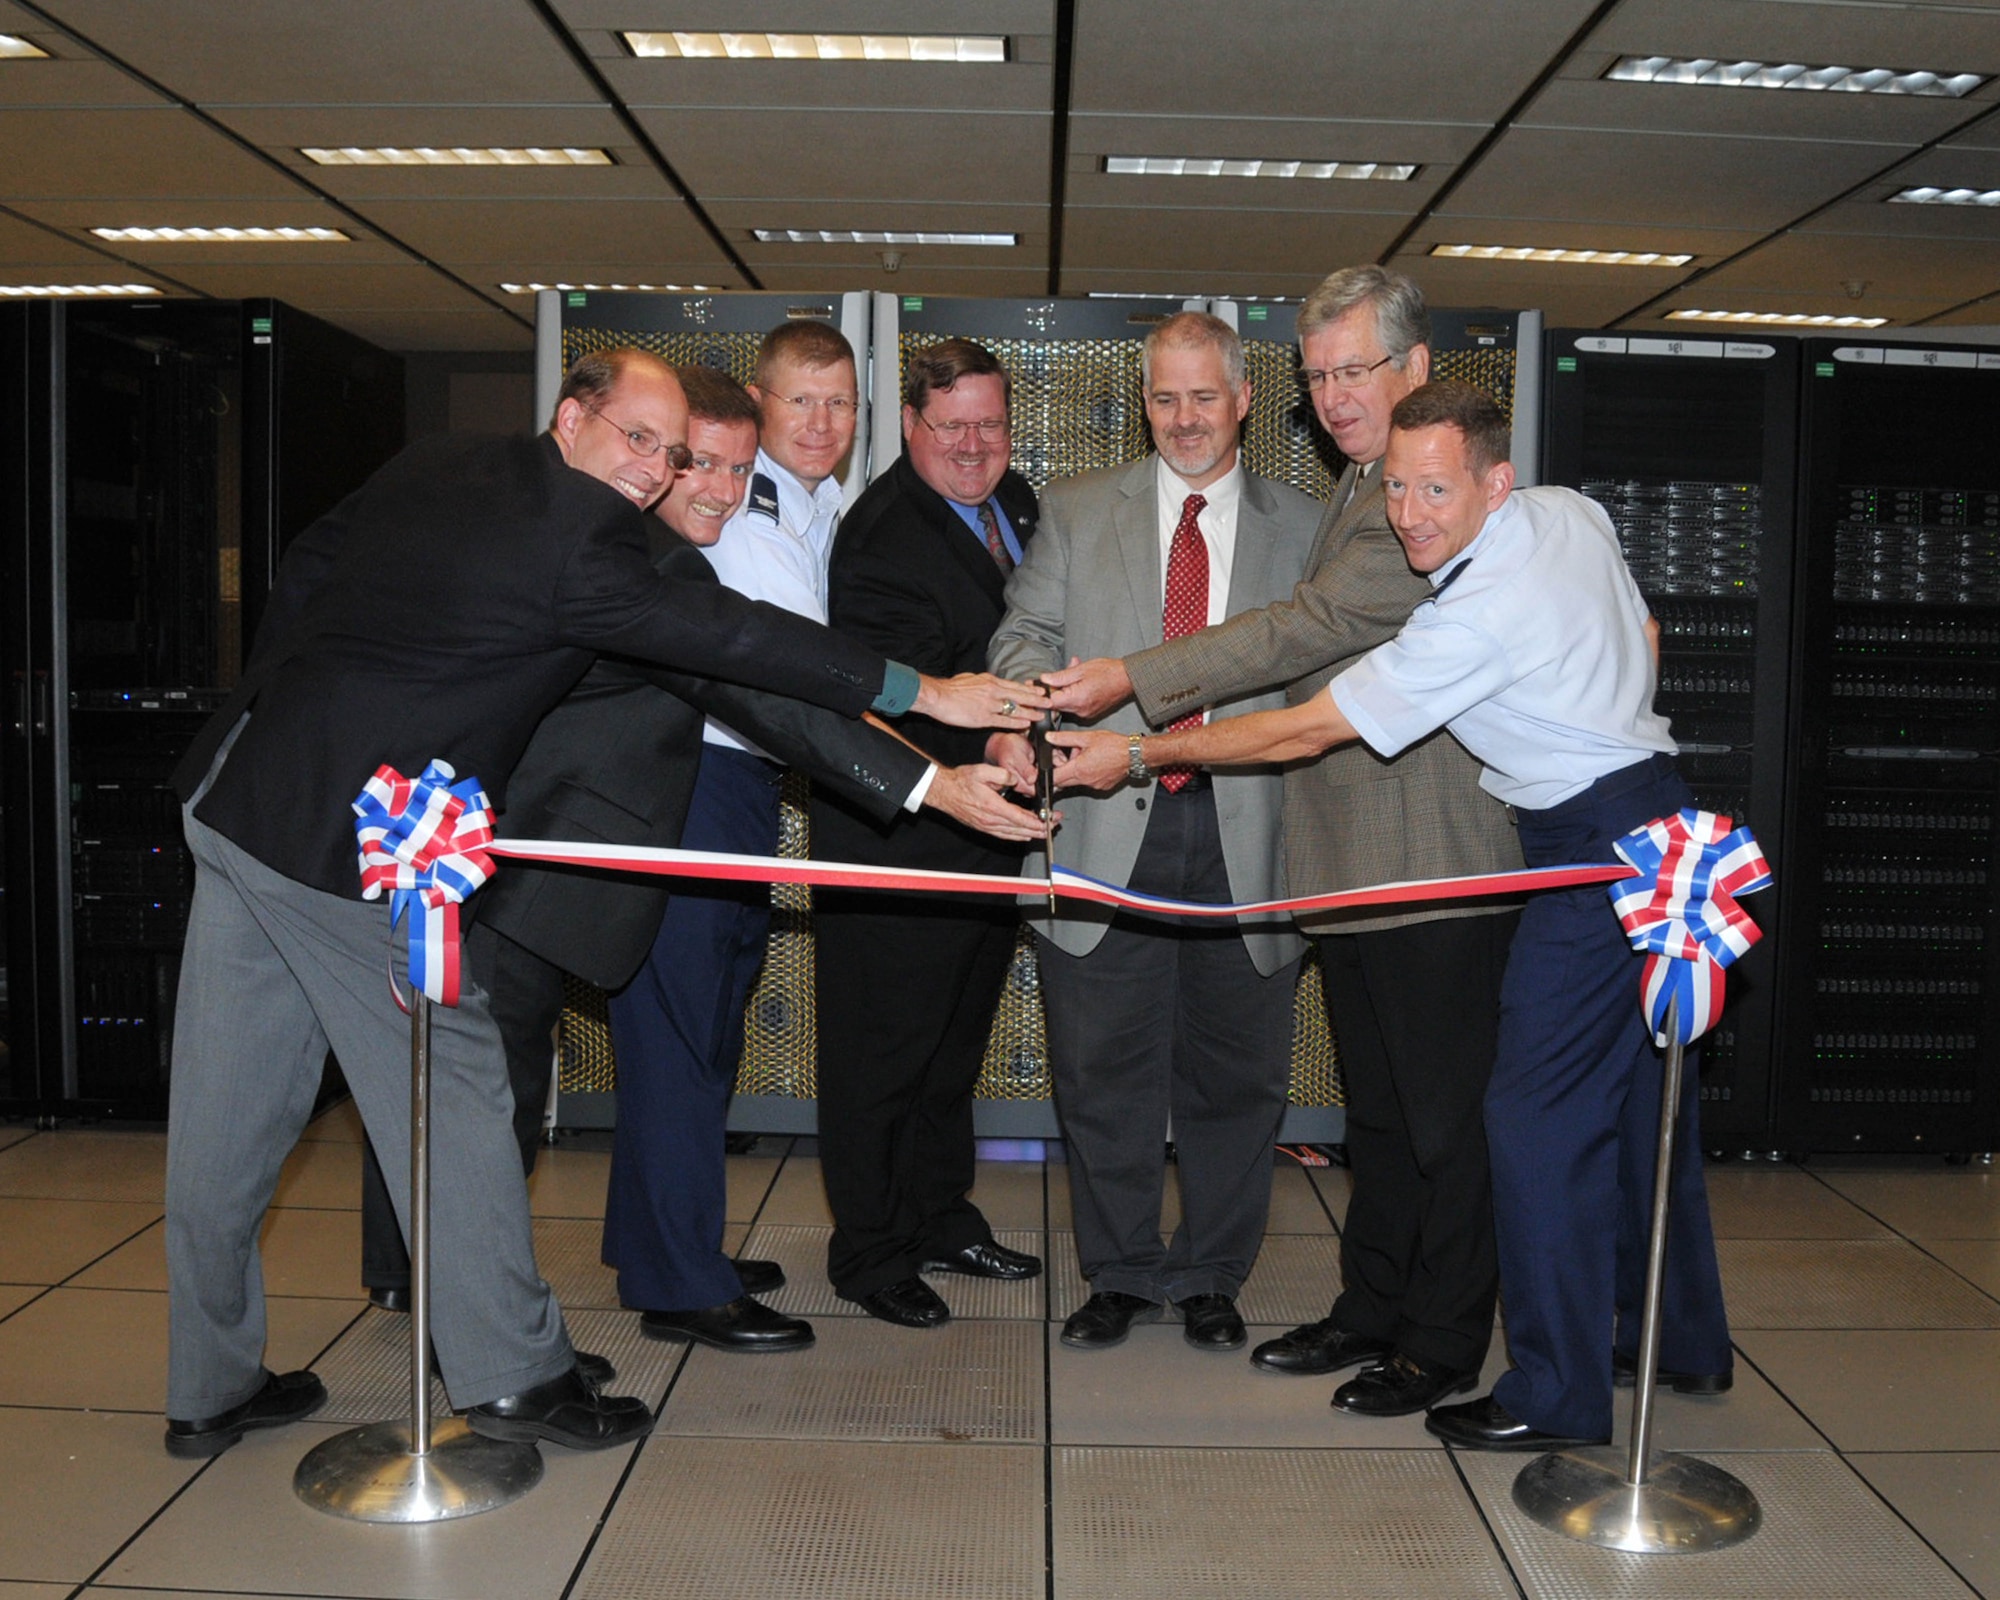 Dr. Edward Kraft, second from right, retiring this month from his position as AEDC Chief Technologist, assists in the ribbon cutting ceremony marking the official debut of the Complex’s Dedicated High Performance Computing lab in 2009. During his time at AEDC, Kraft has seen the Complex and facilities grow and been a part of many technological advances. Pictured from left are AEDC team members Lance Baxter, Mark Rigney, then Col. Robert Bender, Michael Glennon, James Brock, Kraft and then Col. Eugene Mittuch. (U.S. Air Force photo/David Housch)